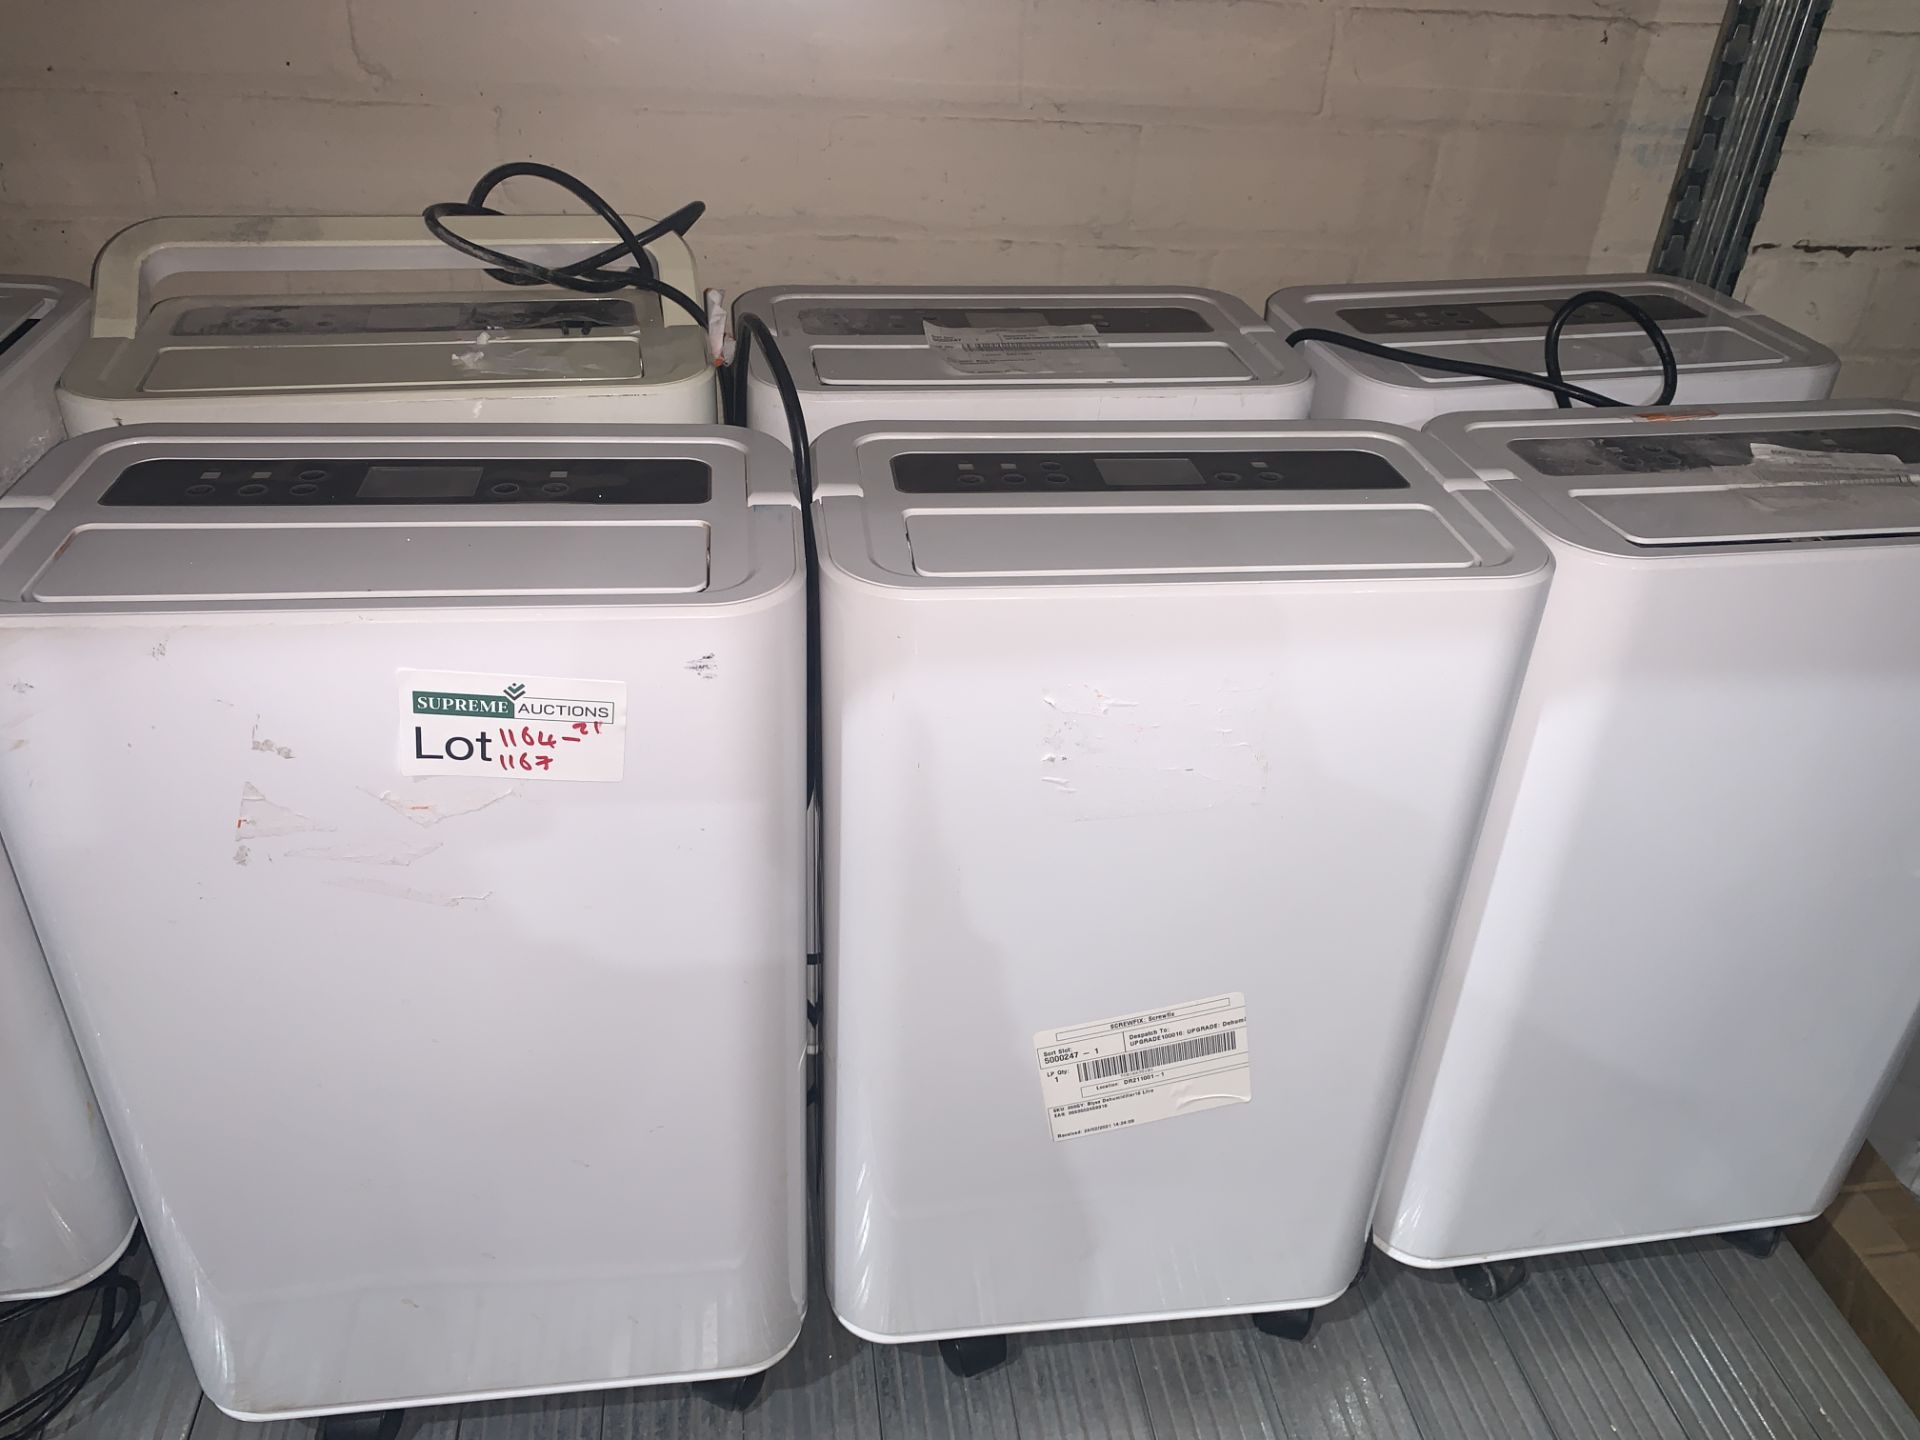 BLYSS 16L DEHUMIDIFIERS (UNCHECKED, UNTESTED)